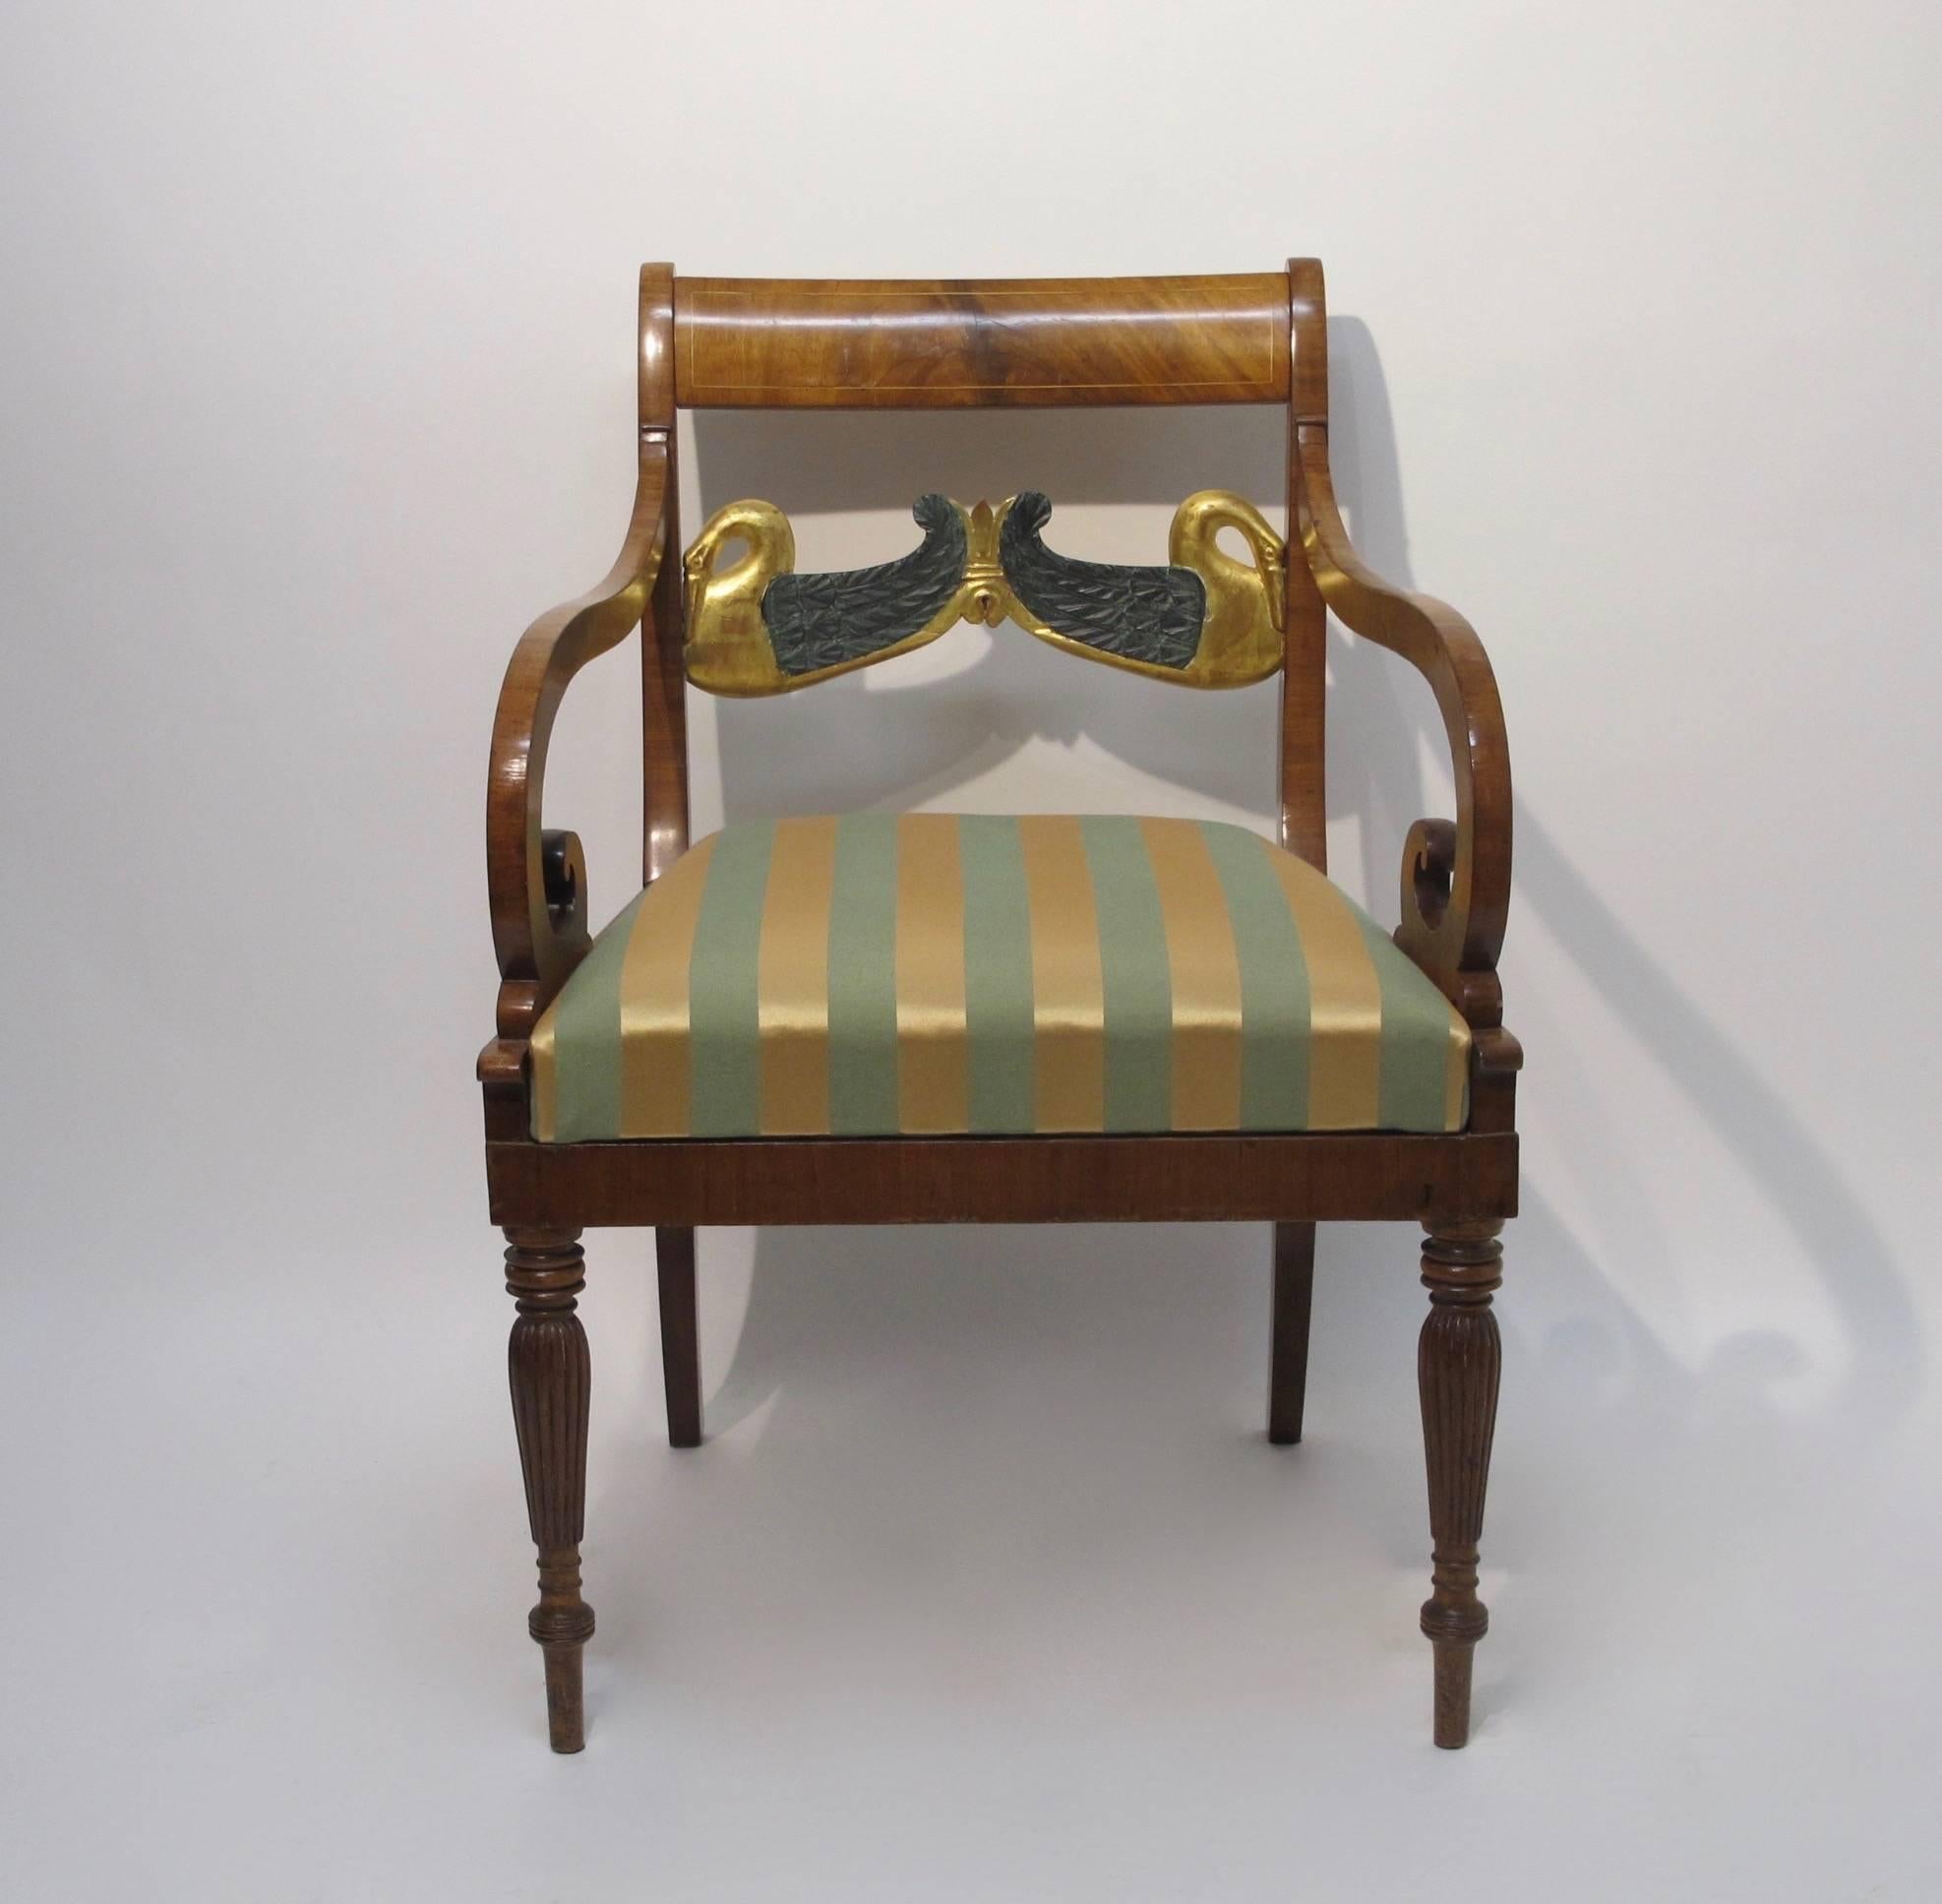 A stylish mahogany armchair with gilt and parcel painted swan backs plat, gently swooping and curved arms, sitting on turned and reeded front legs with saber back legs. England, mid 20th century.